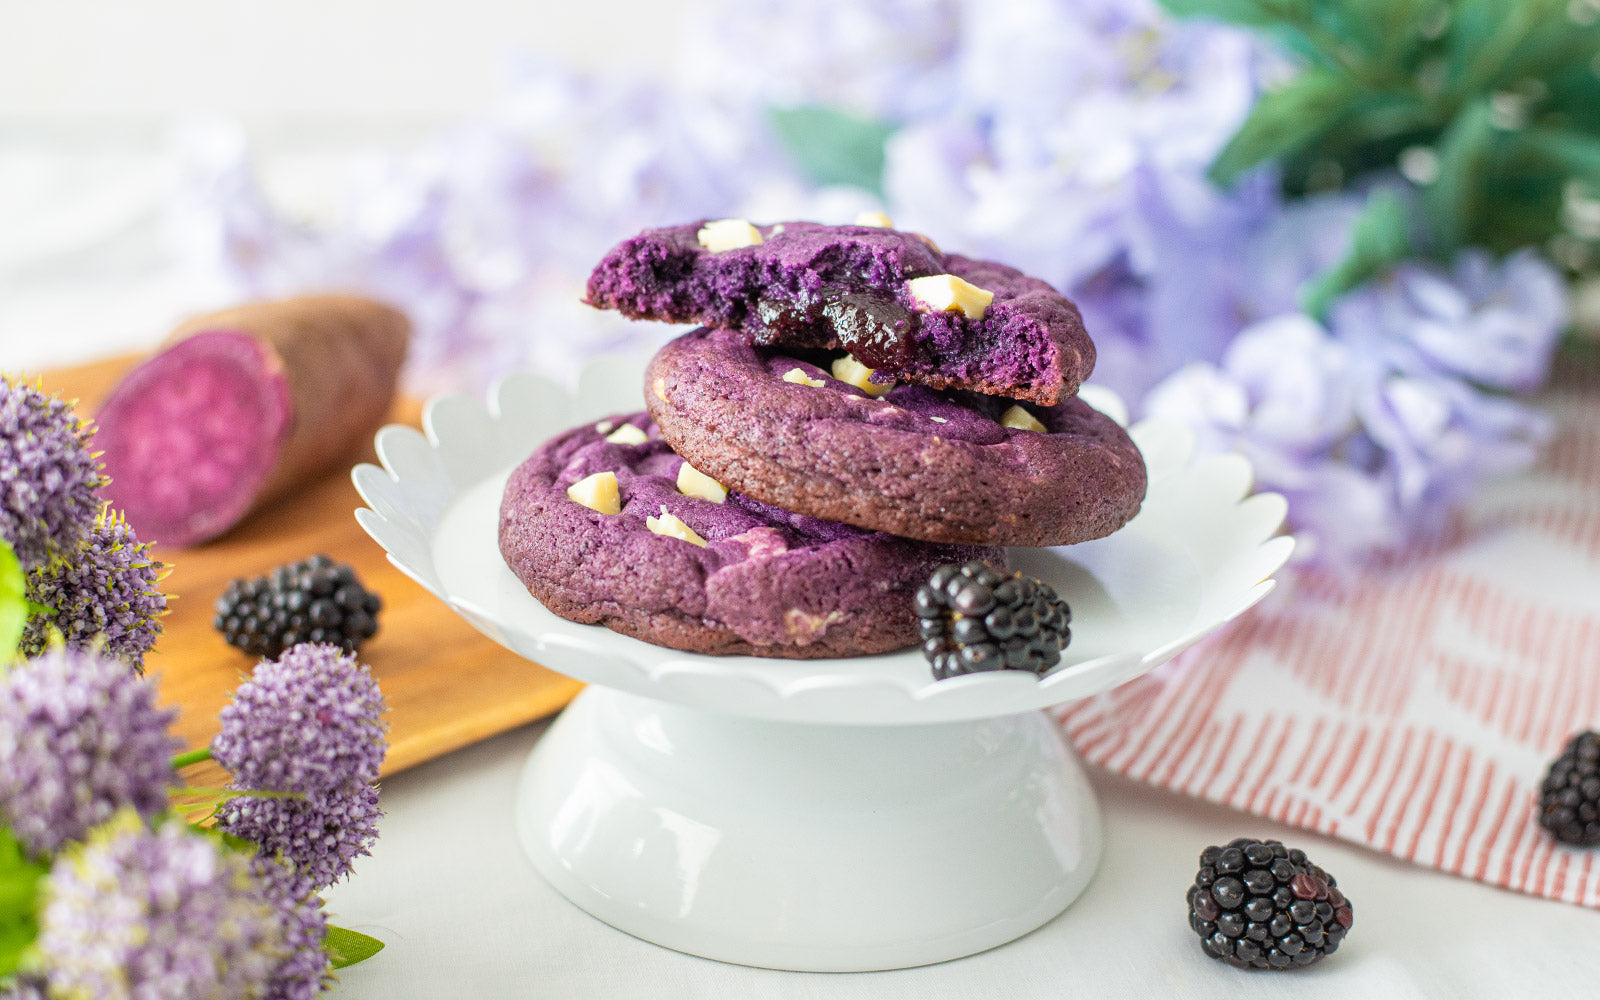 A stack of Ube Blackberry Cookies on a plate surrounded by purple yam, blackberries and flowers.